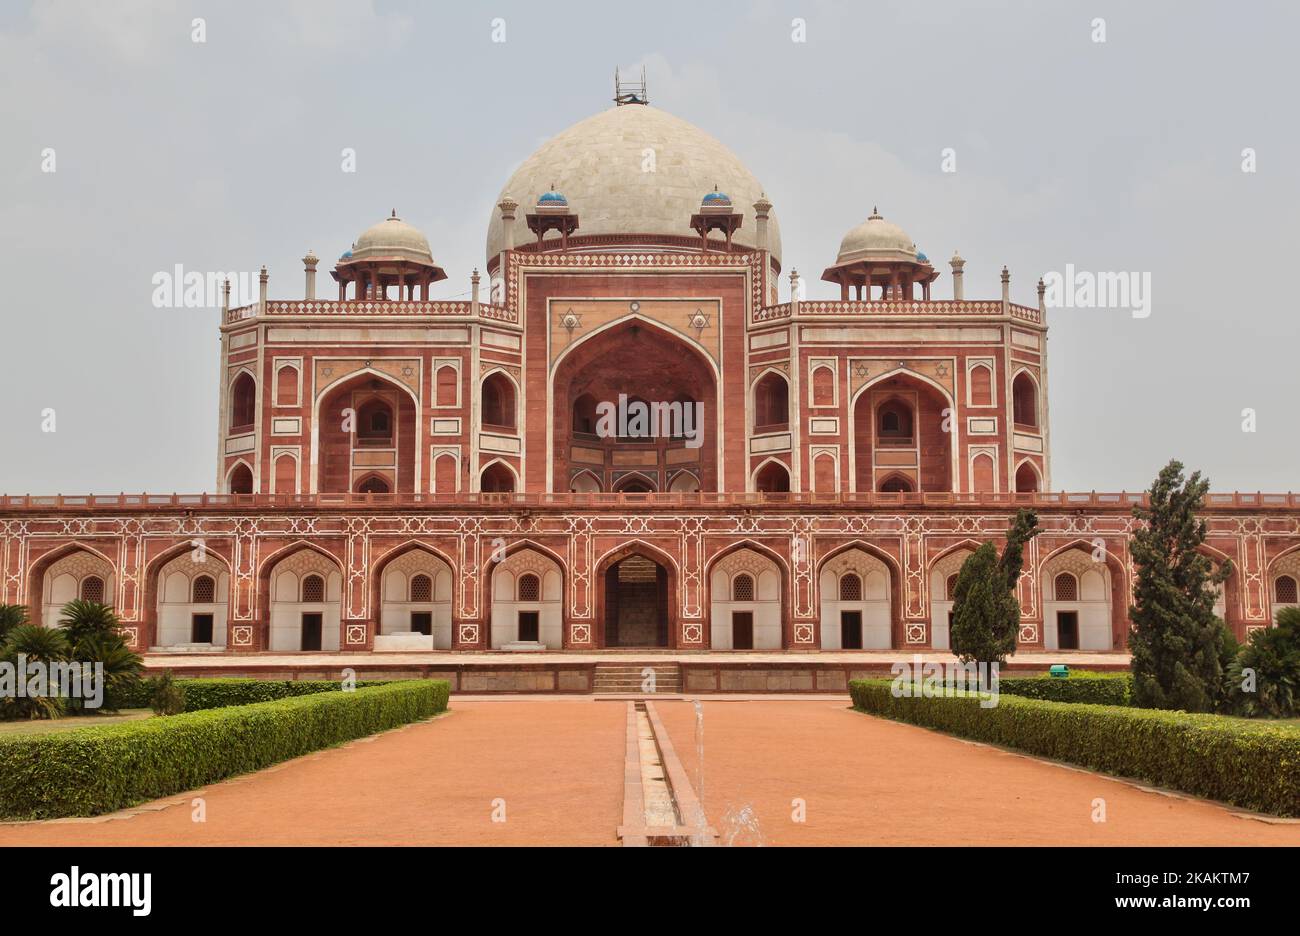 Tomb of the Mughal Emperor Humayun in New Delhi, Delhi, India. Humayun's tomb was commissioned by Humayun's first wife and chief consort, Empress Bega Begum. The mausoleum was completed in the year 1570 and contains the tombs of Emperor Humayun as well Bega Begum, Hamida Begum, and Dara Shikoh. The tomb was the first garden-tomb on the Indian subcontinent. (Photo by Creative Touch Imaging Ltd./NurPhoto) *** Please Use Credit from Credit Field *** Stock Photo